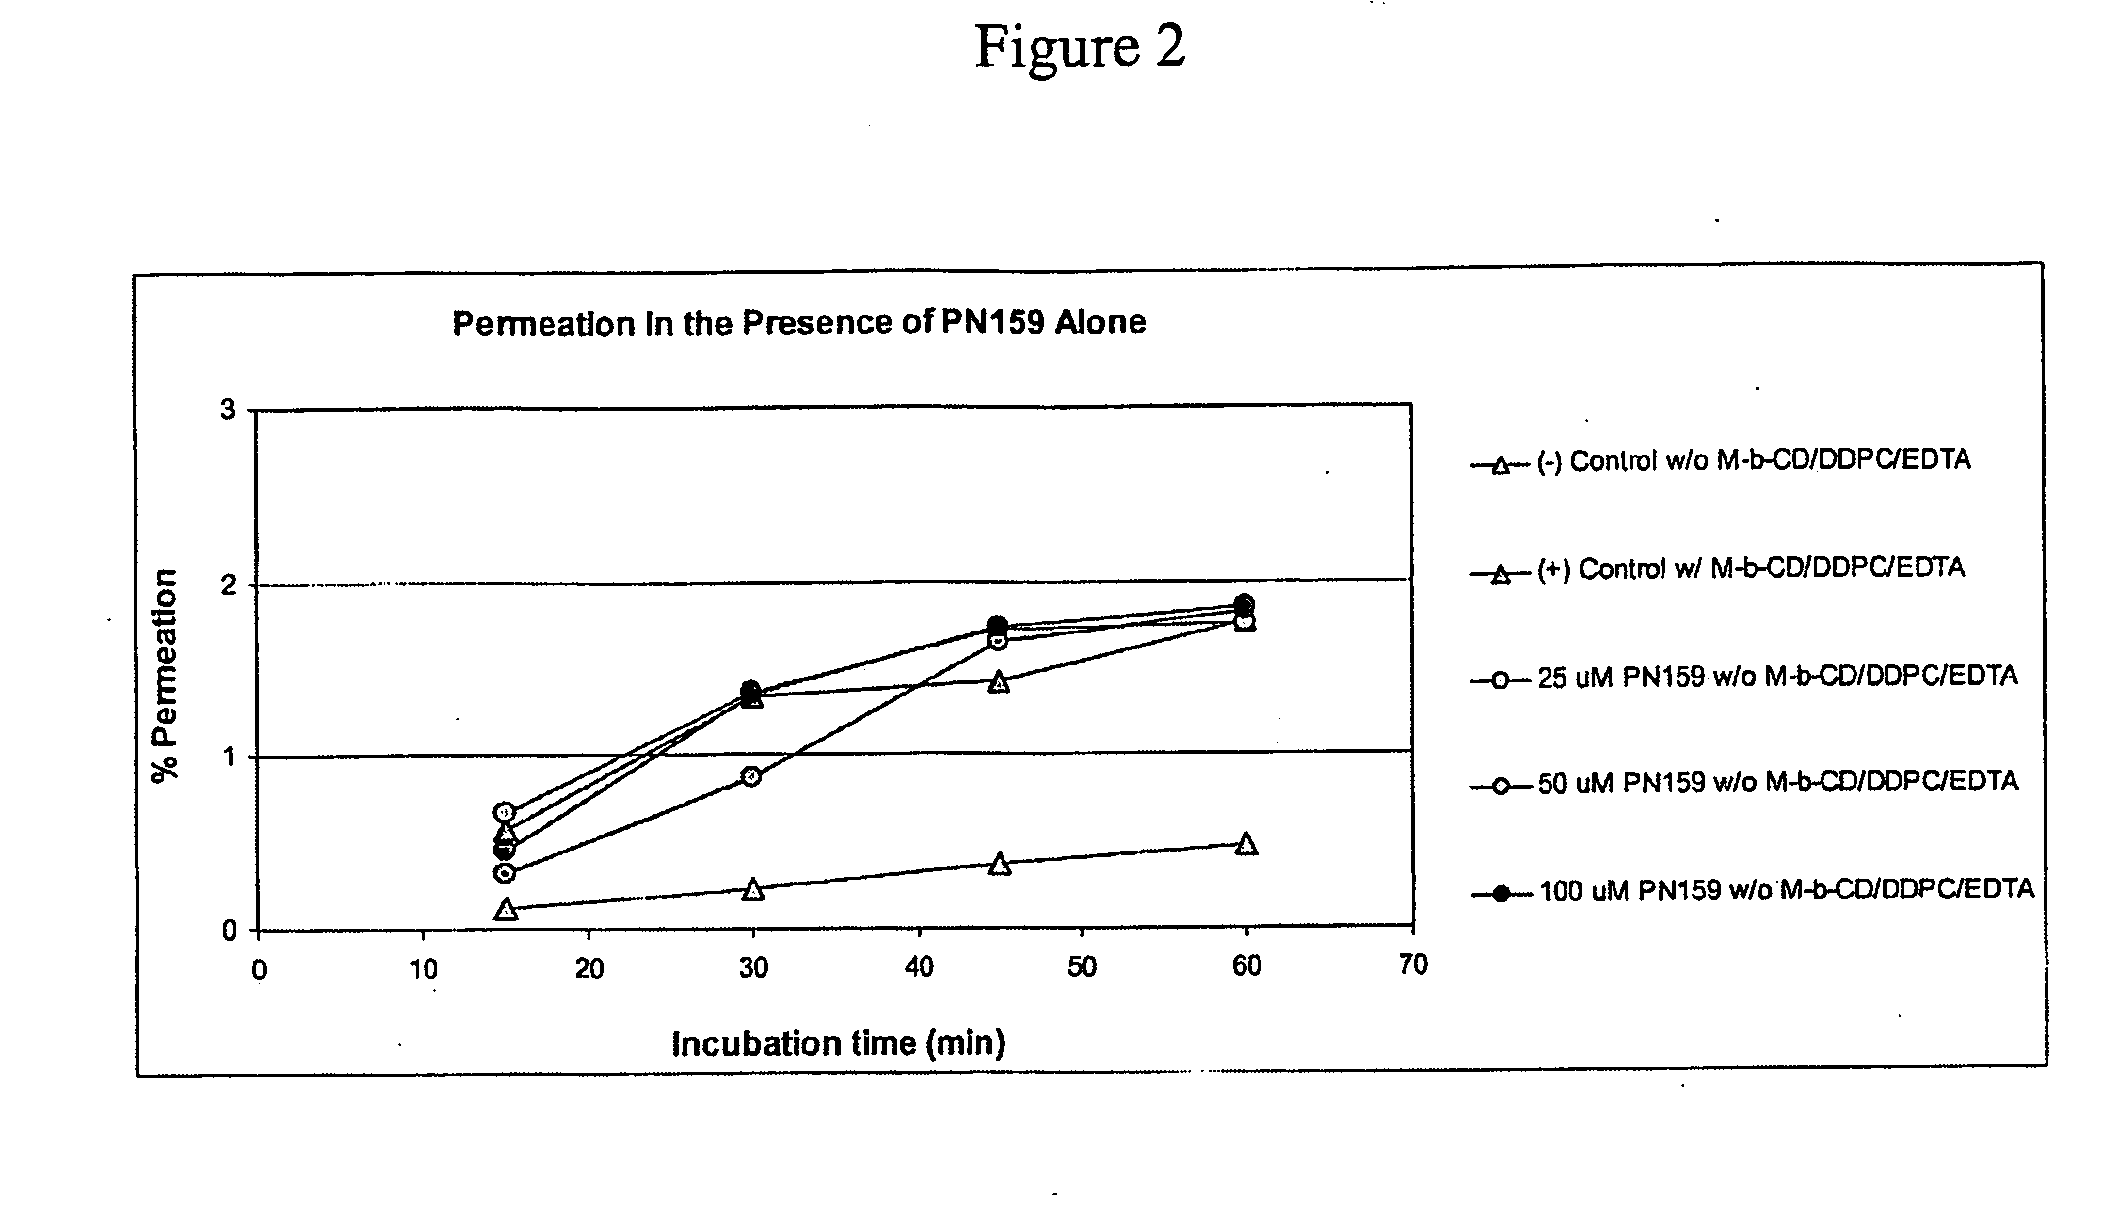 Tight junction modulator peptides for enhanced mucosal delivery of therapeutic compounds